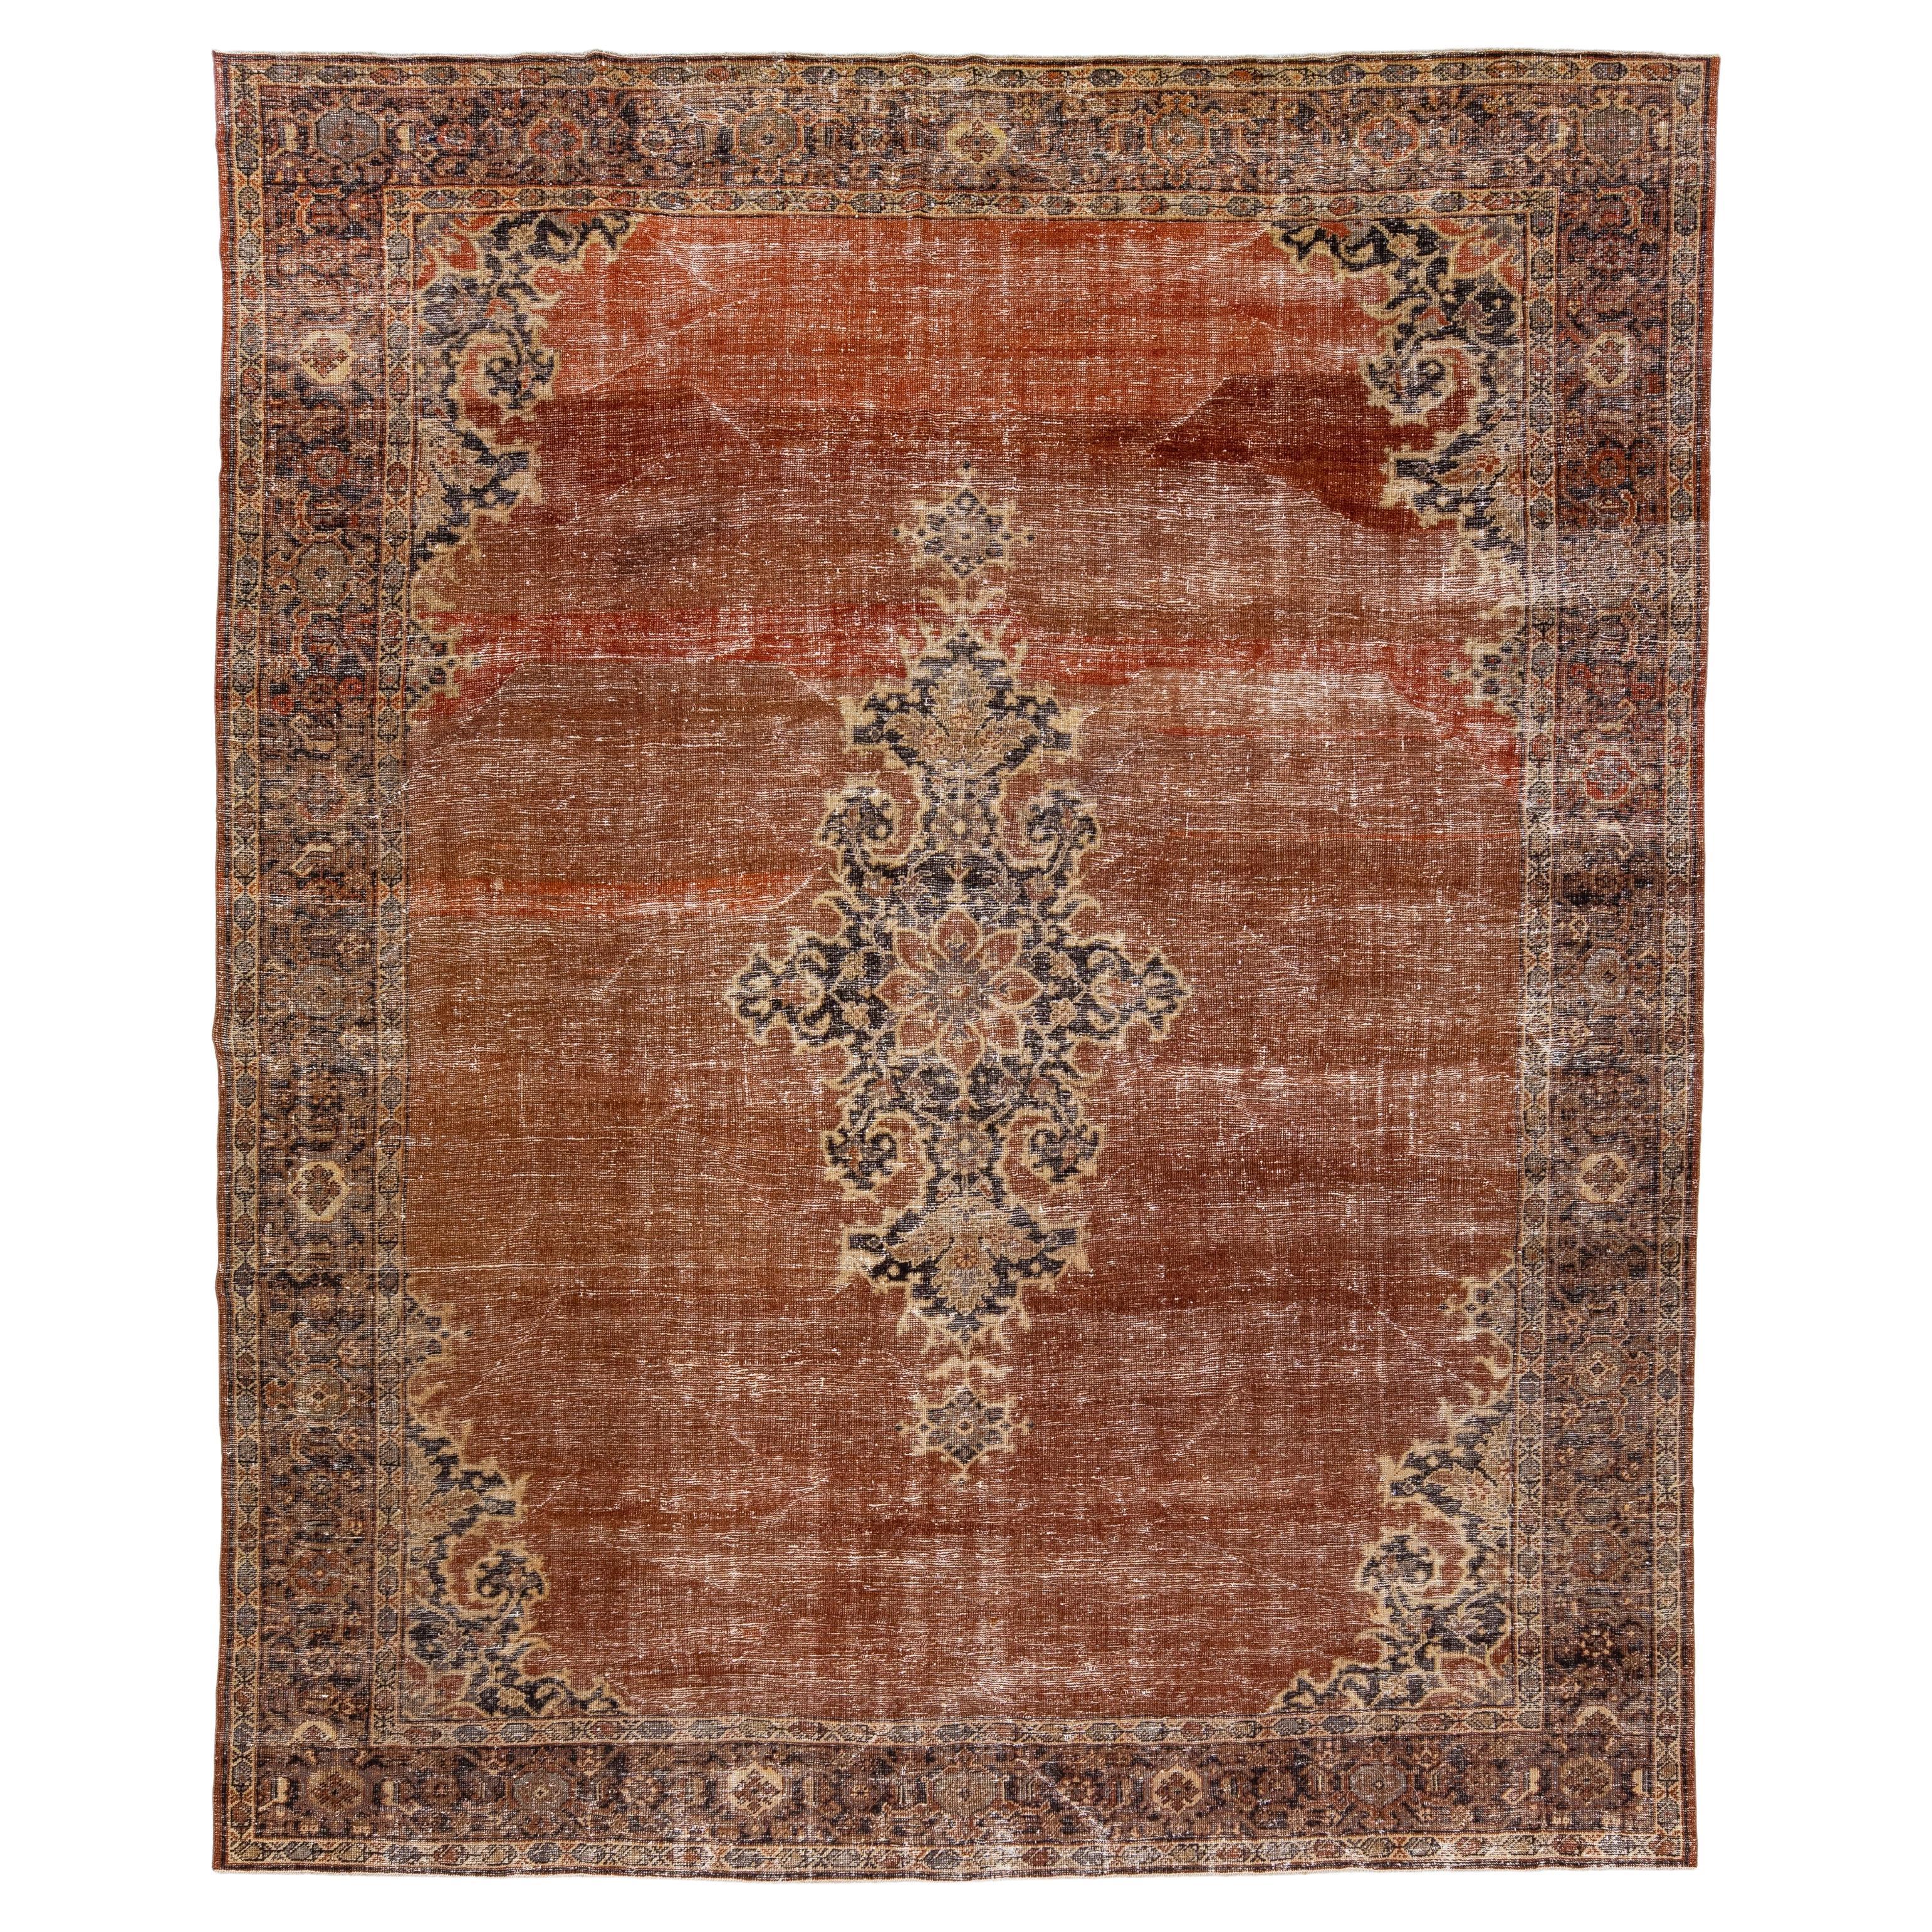 Persian Handmade Antique Tabriz Medallion Wool Rug With Copper Color Field For Sale